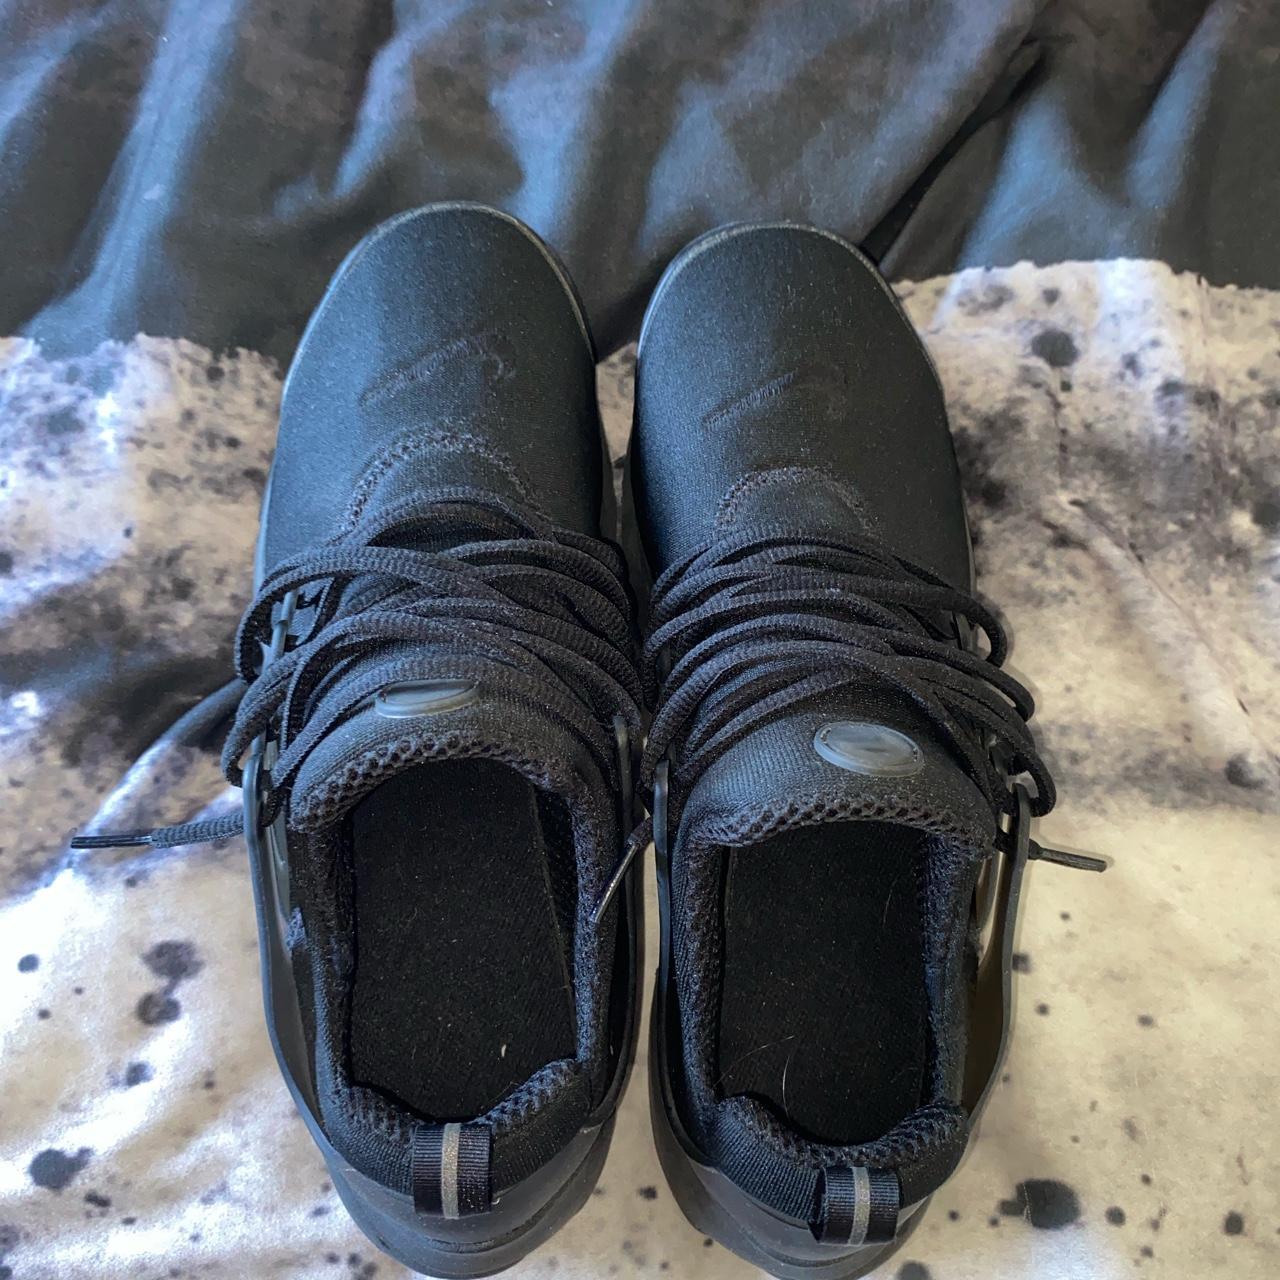 nike presto worn once, perfect condition 10/10 - Depop